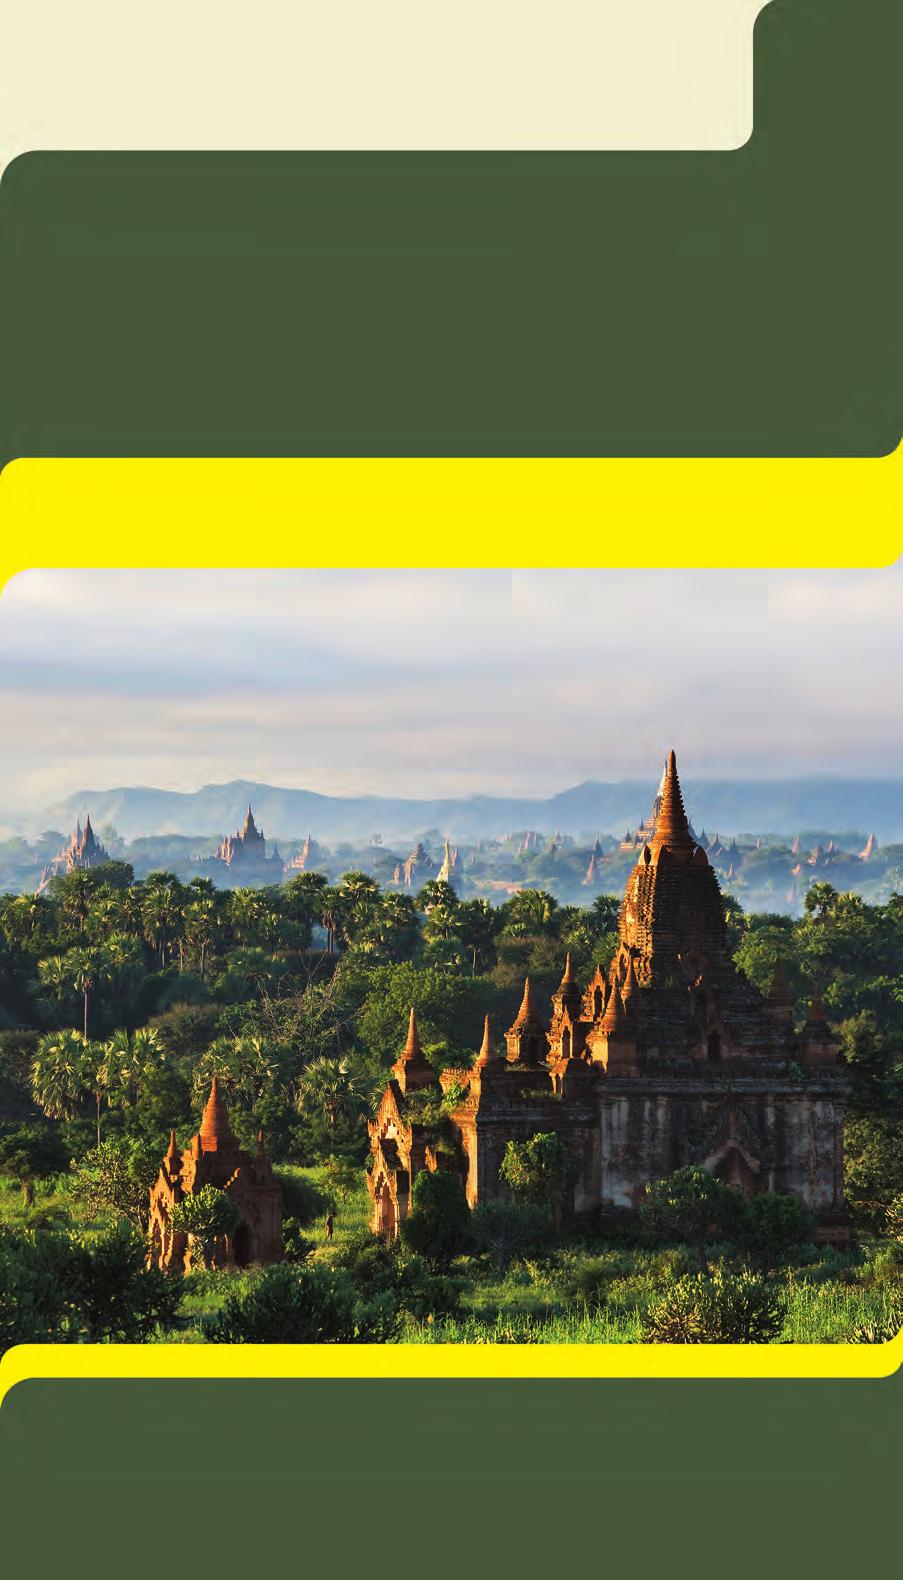 MYSTERIES OF MYANMAR Burmese Heritage Revealed November 8-21, 2016 14 days from $4,698 total price from Los Angeles, San Francisco ($4,195 air & land inclusive plus $503 airline taxes and fees)